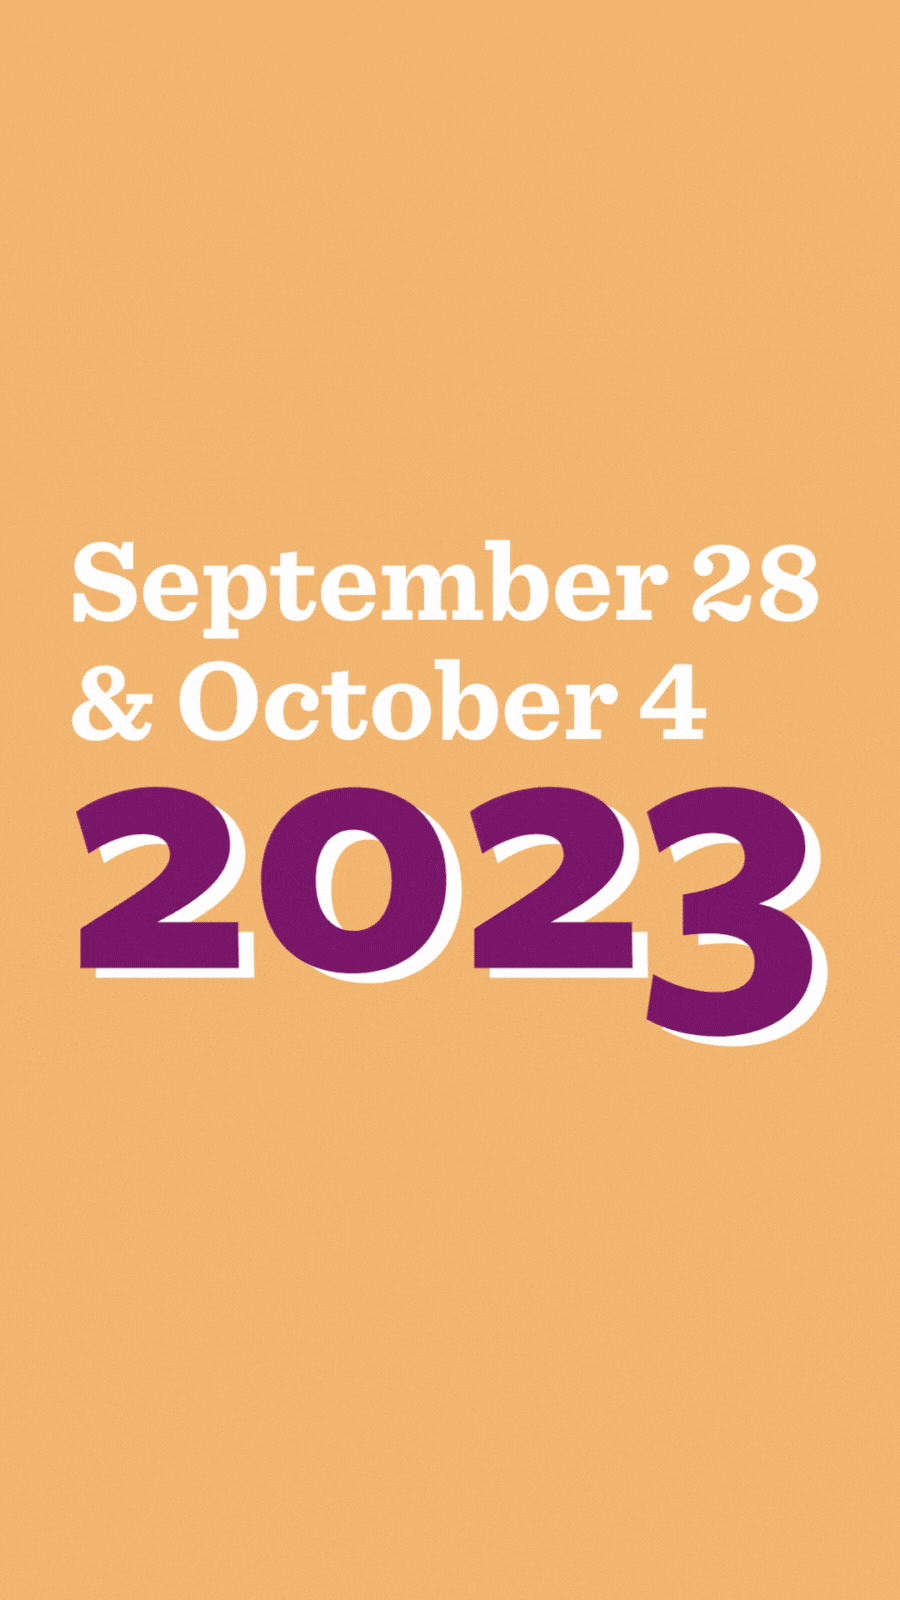 September 28 & October 4 2023 — animation changes the background color from yellow to pink to purple